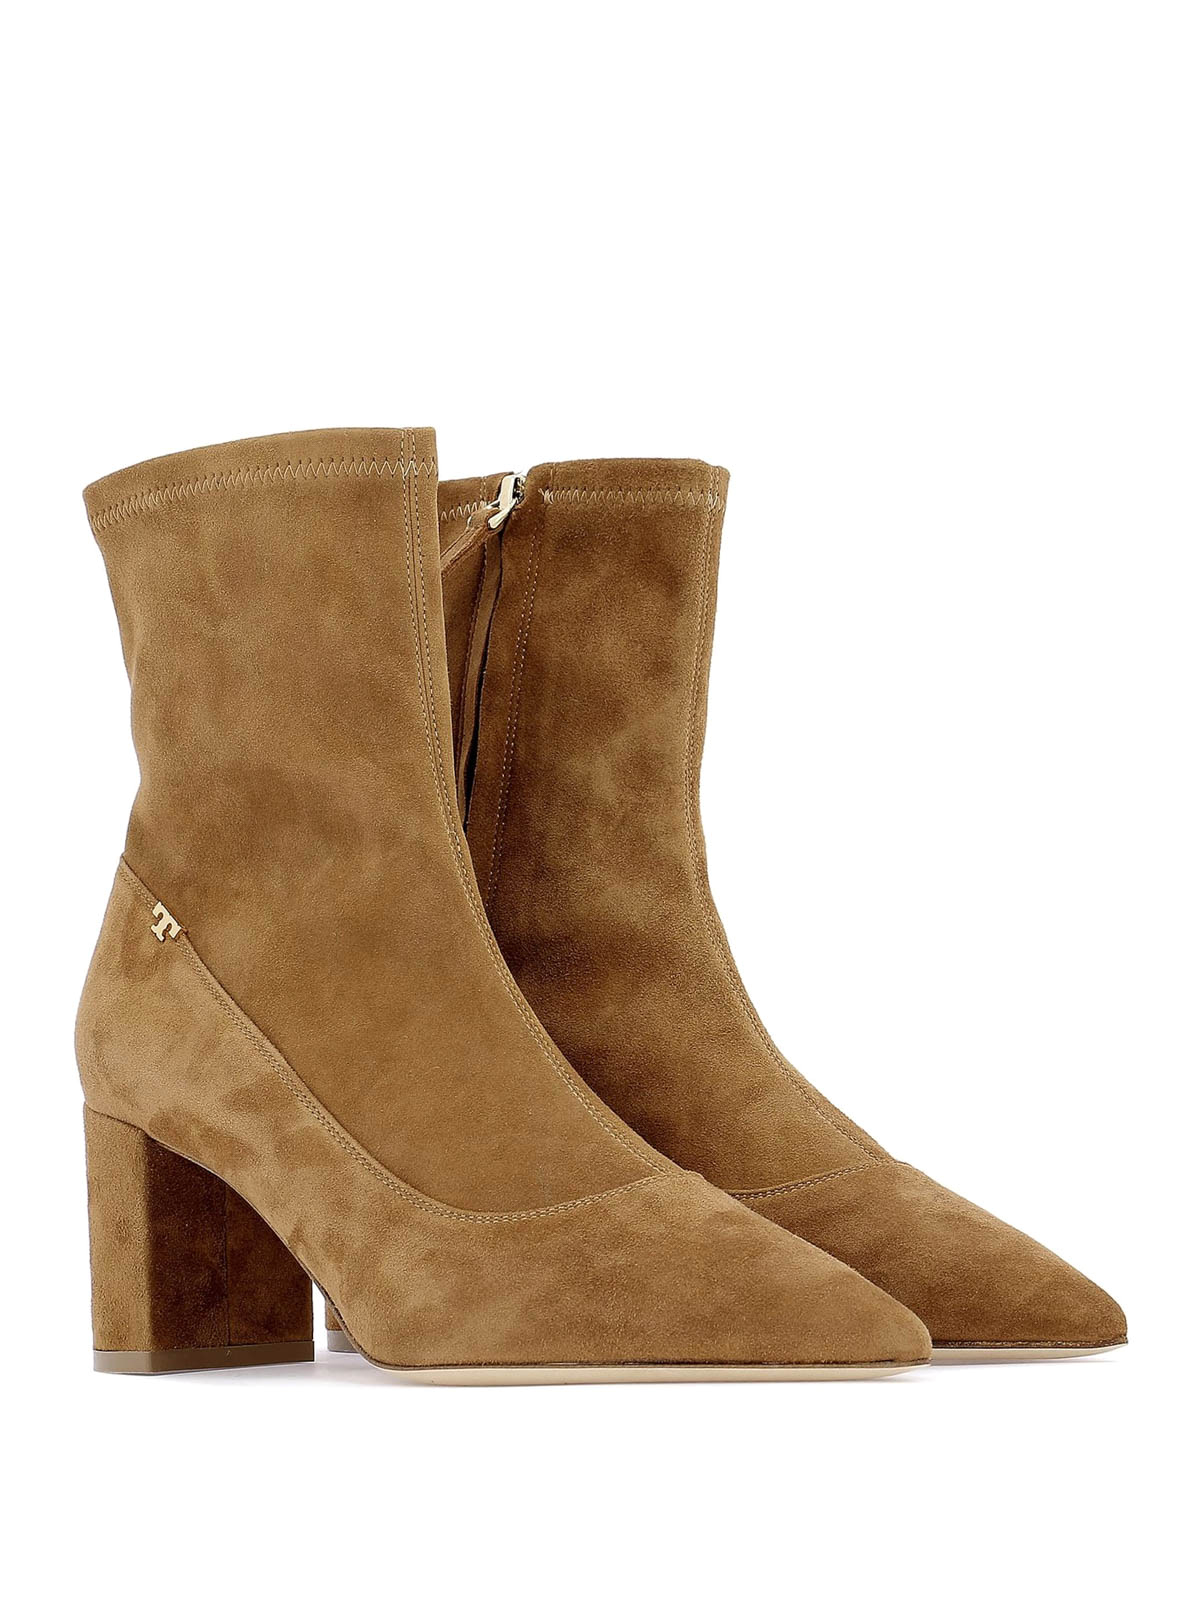 tory burch penelope boots